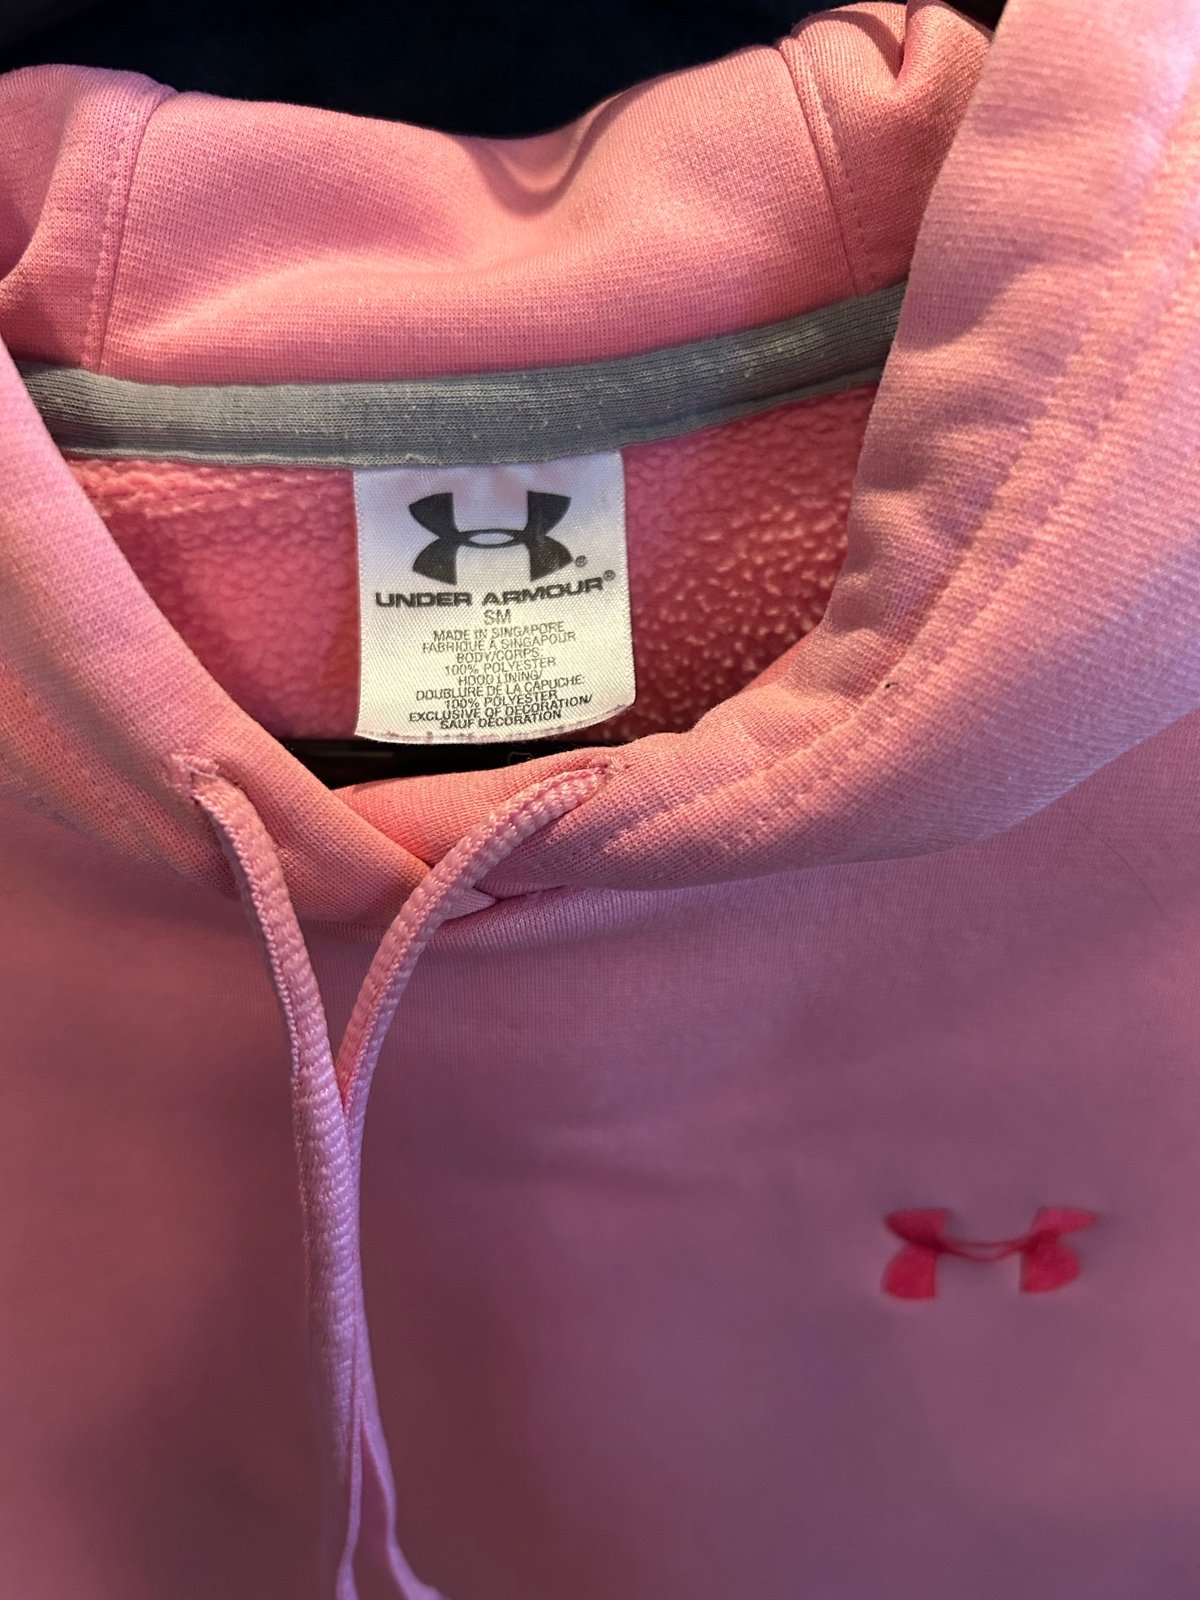 where to buy  Under Armor hoodie S/M pink luaP2D5n1 just buy it